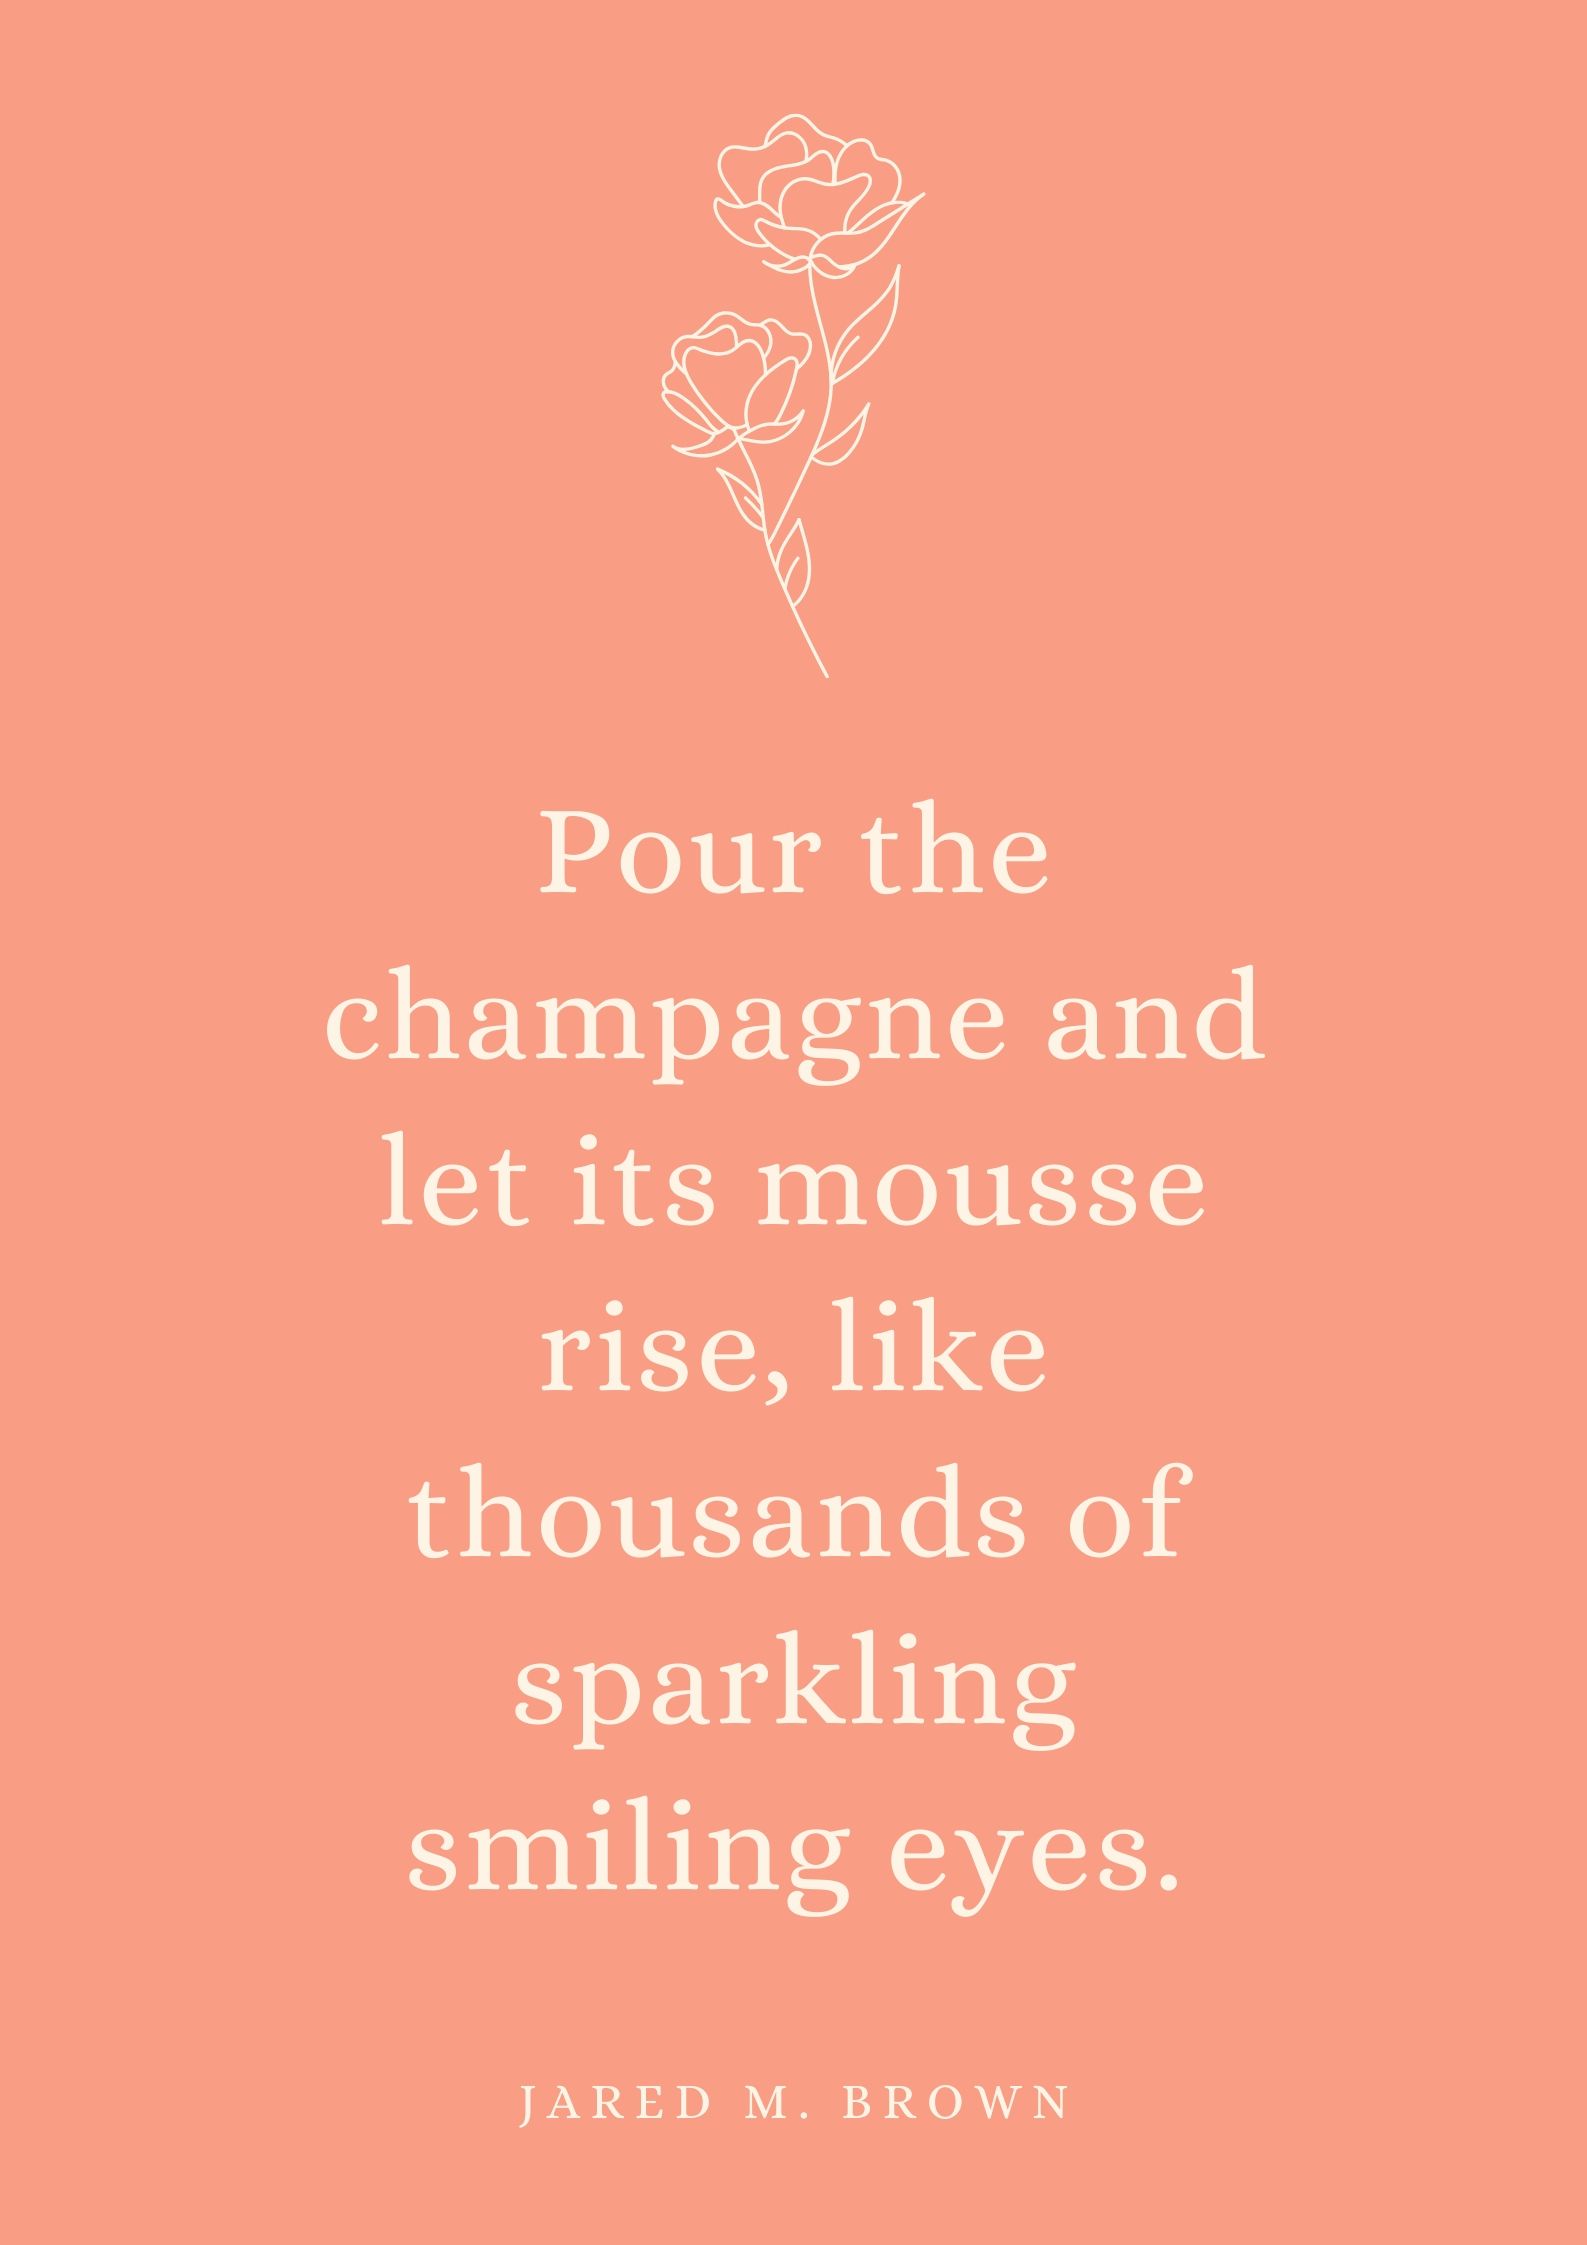 Pour the champagne and let its mousse rise, like thousands of sparkling smiling eyes.